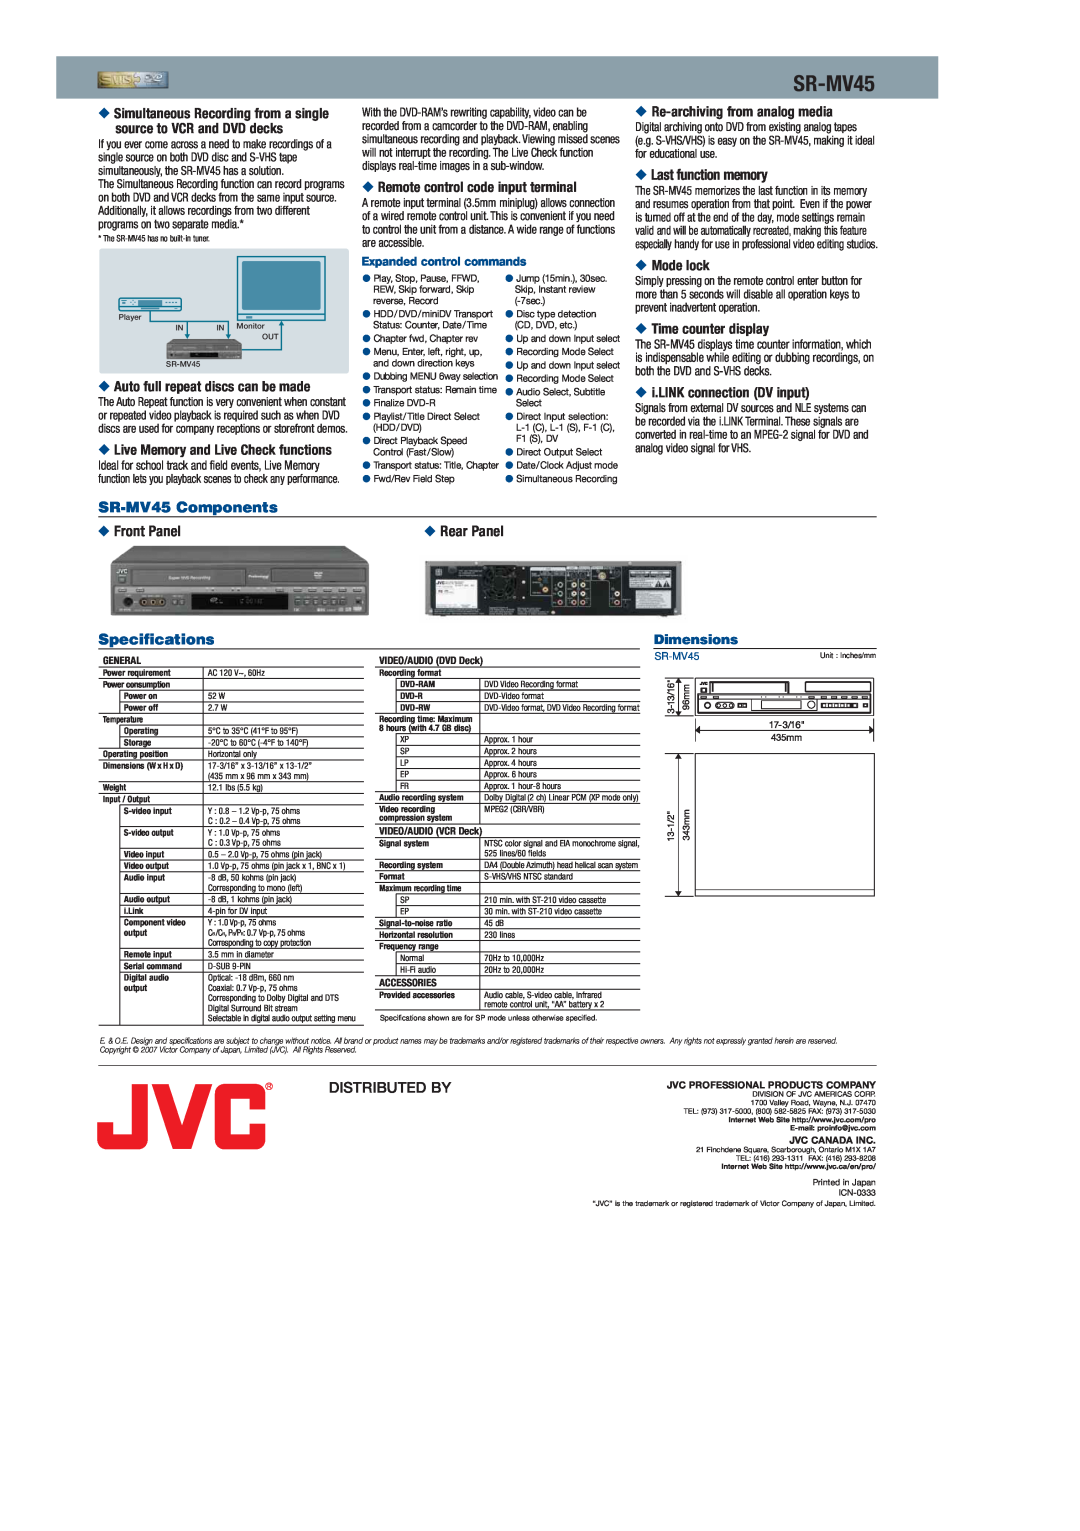 JVC SR-MV45 manual Auto full repeat discs can be made, Remote control code input terminal, Re-archiving from analog media 